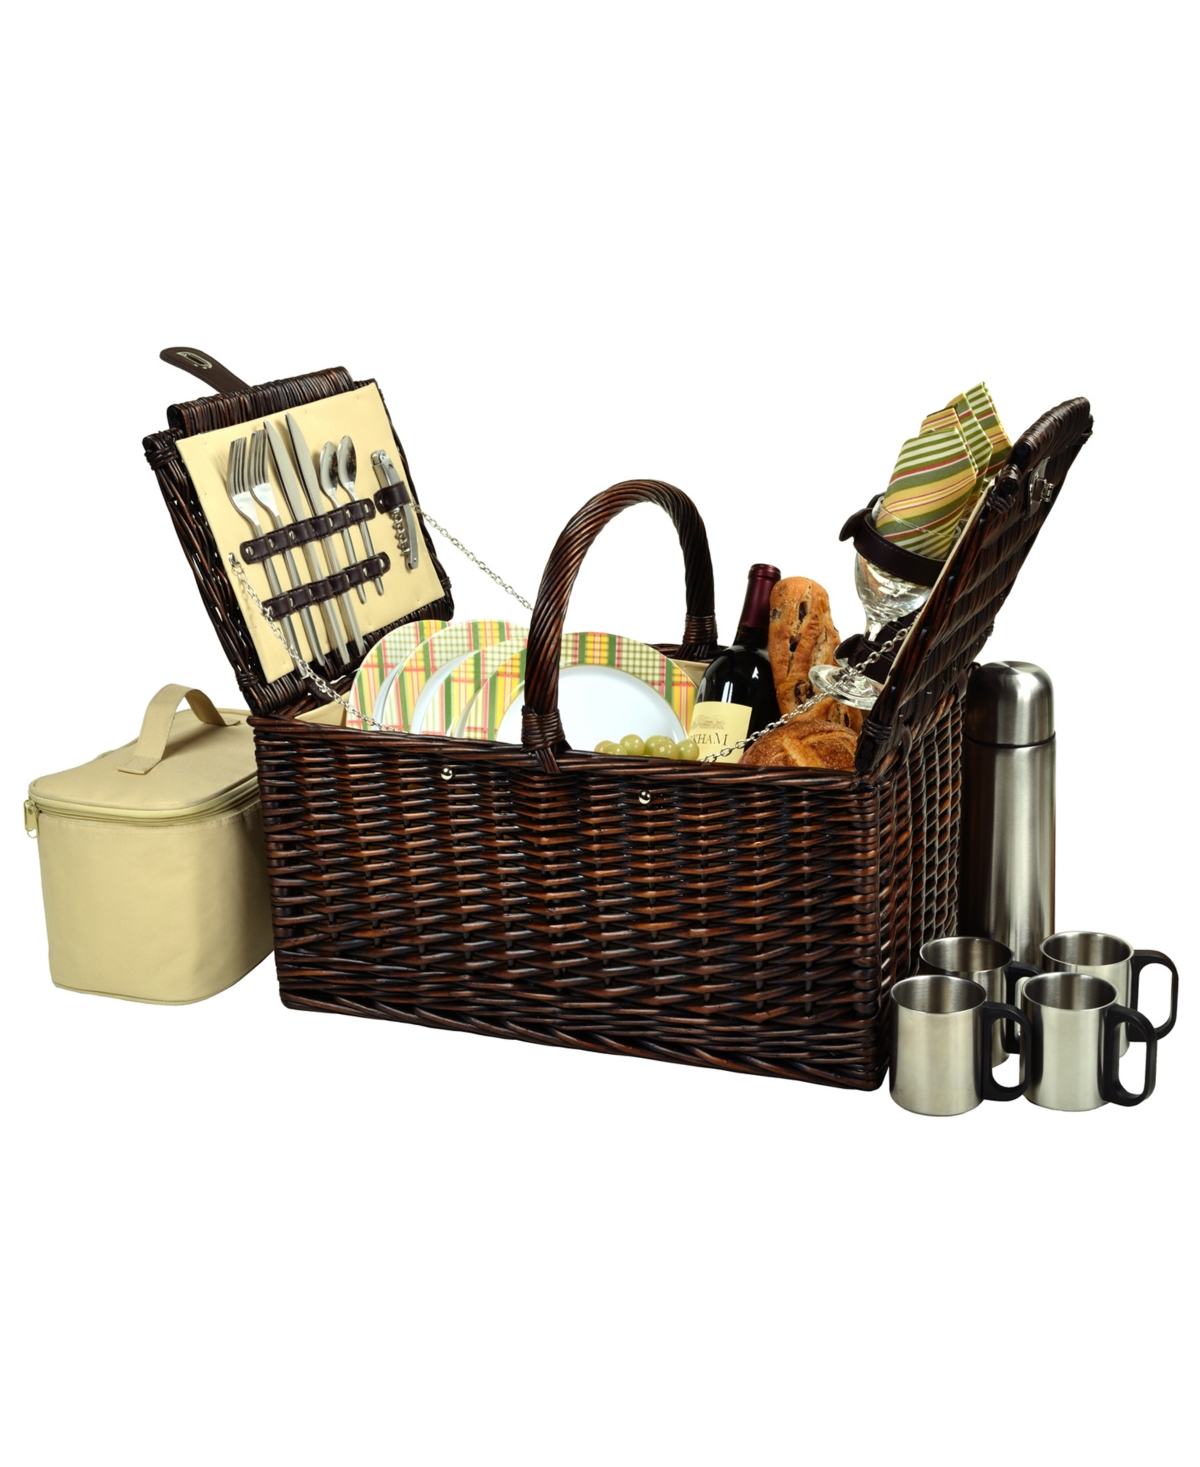 Buckingham Willow Picnic Basket with Coffee Set - Service for 2 - Orange